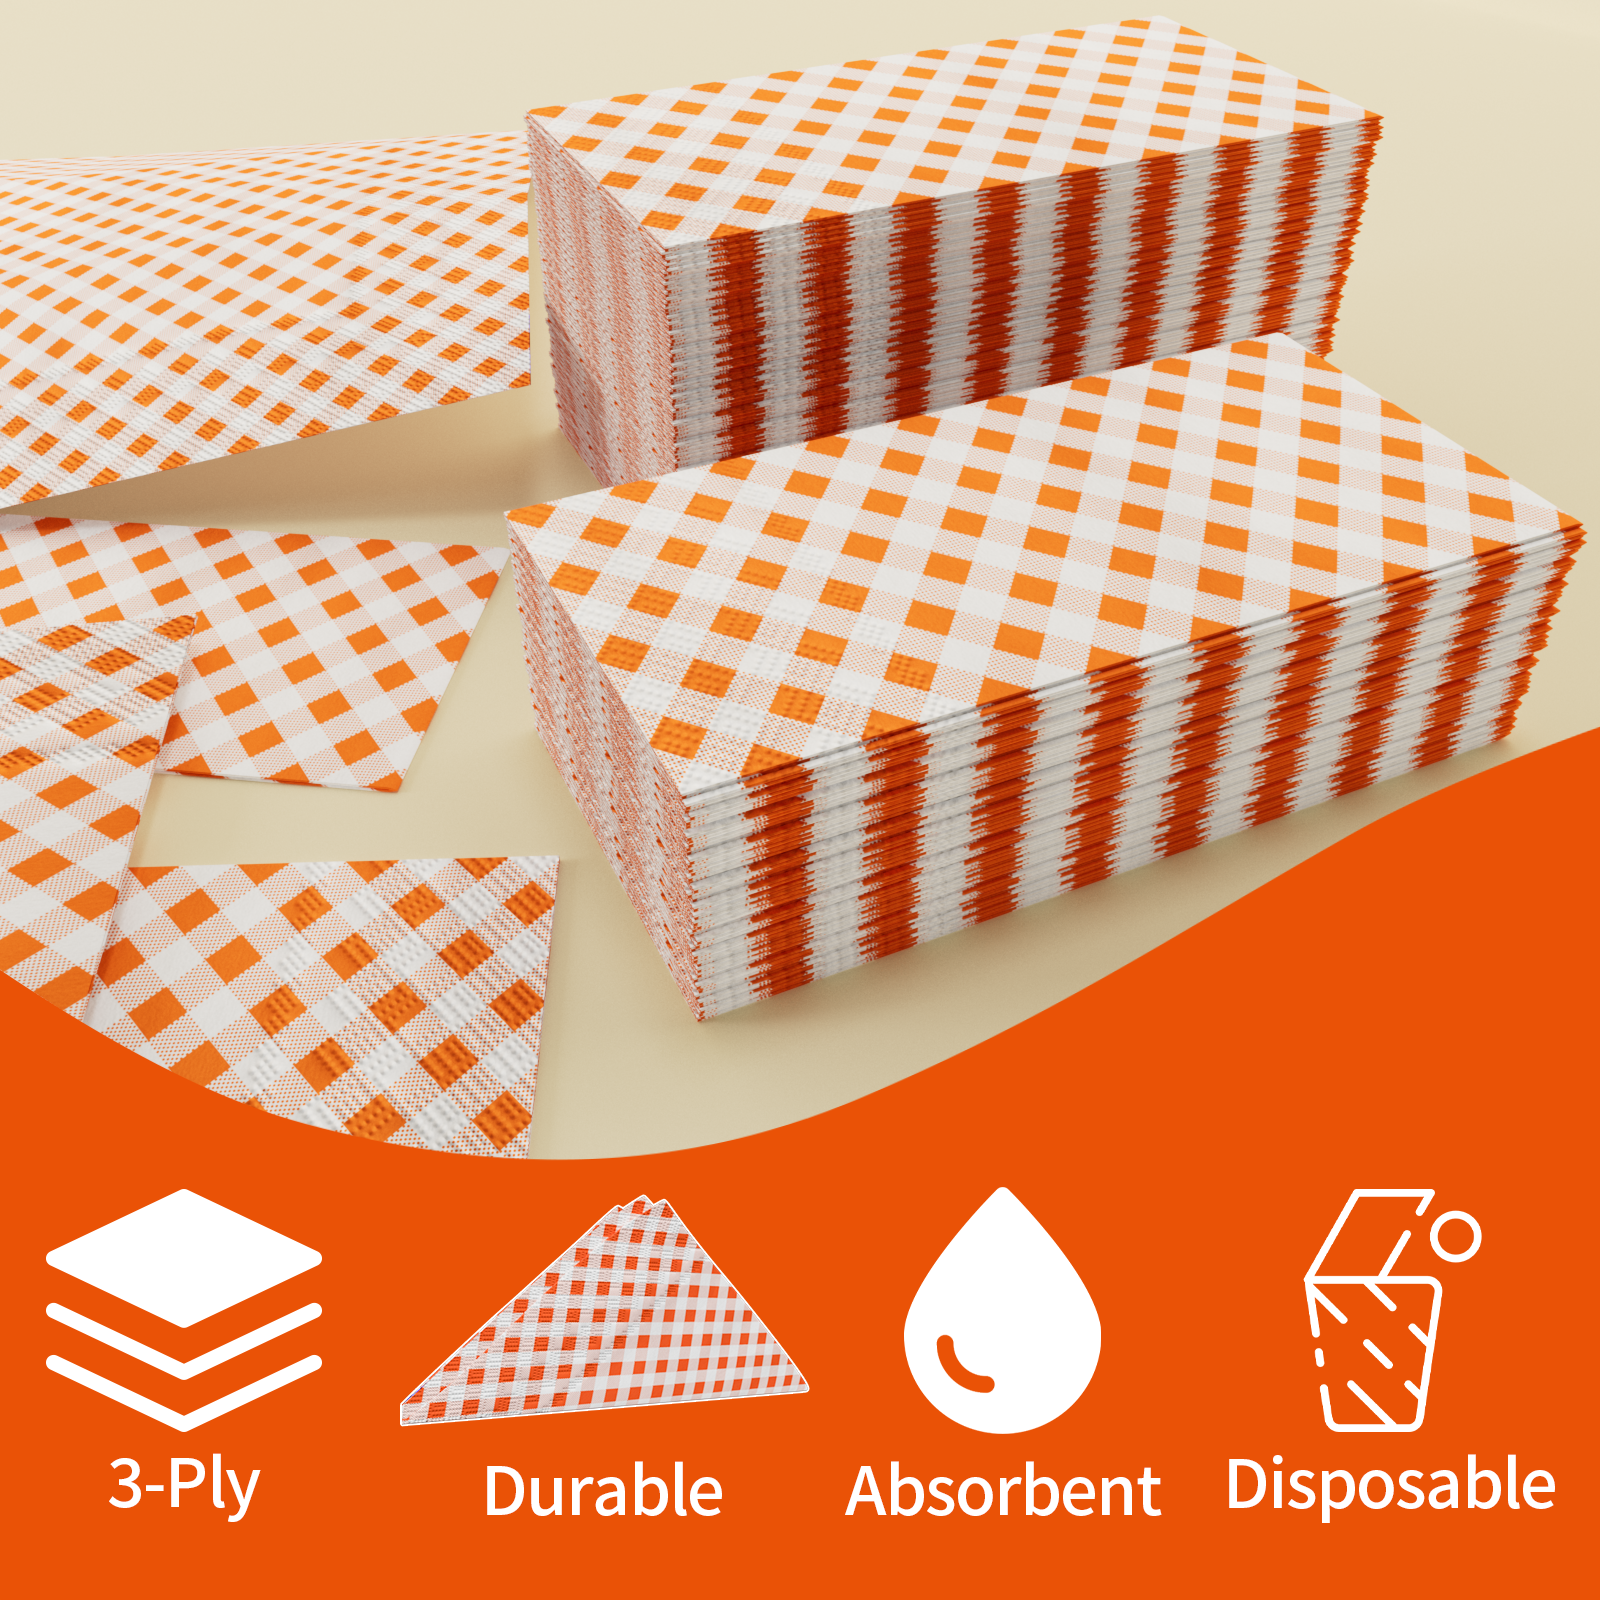 DYLIVeS 50 Count Orange Buffalo plaid Napkins Disposable Towels Orange and White Checkered Guest Napkins 3 Ply Dinner Napkins Gingham Paper Napkins - image 2 of 7